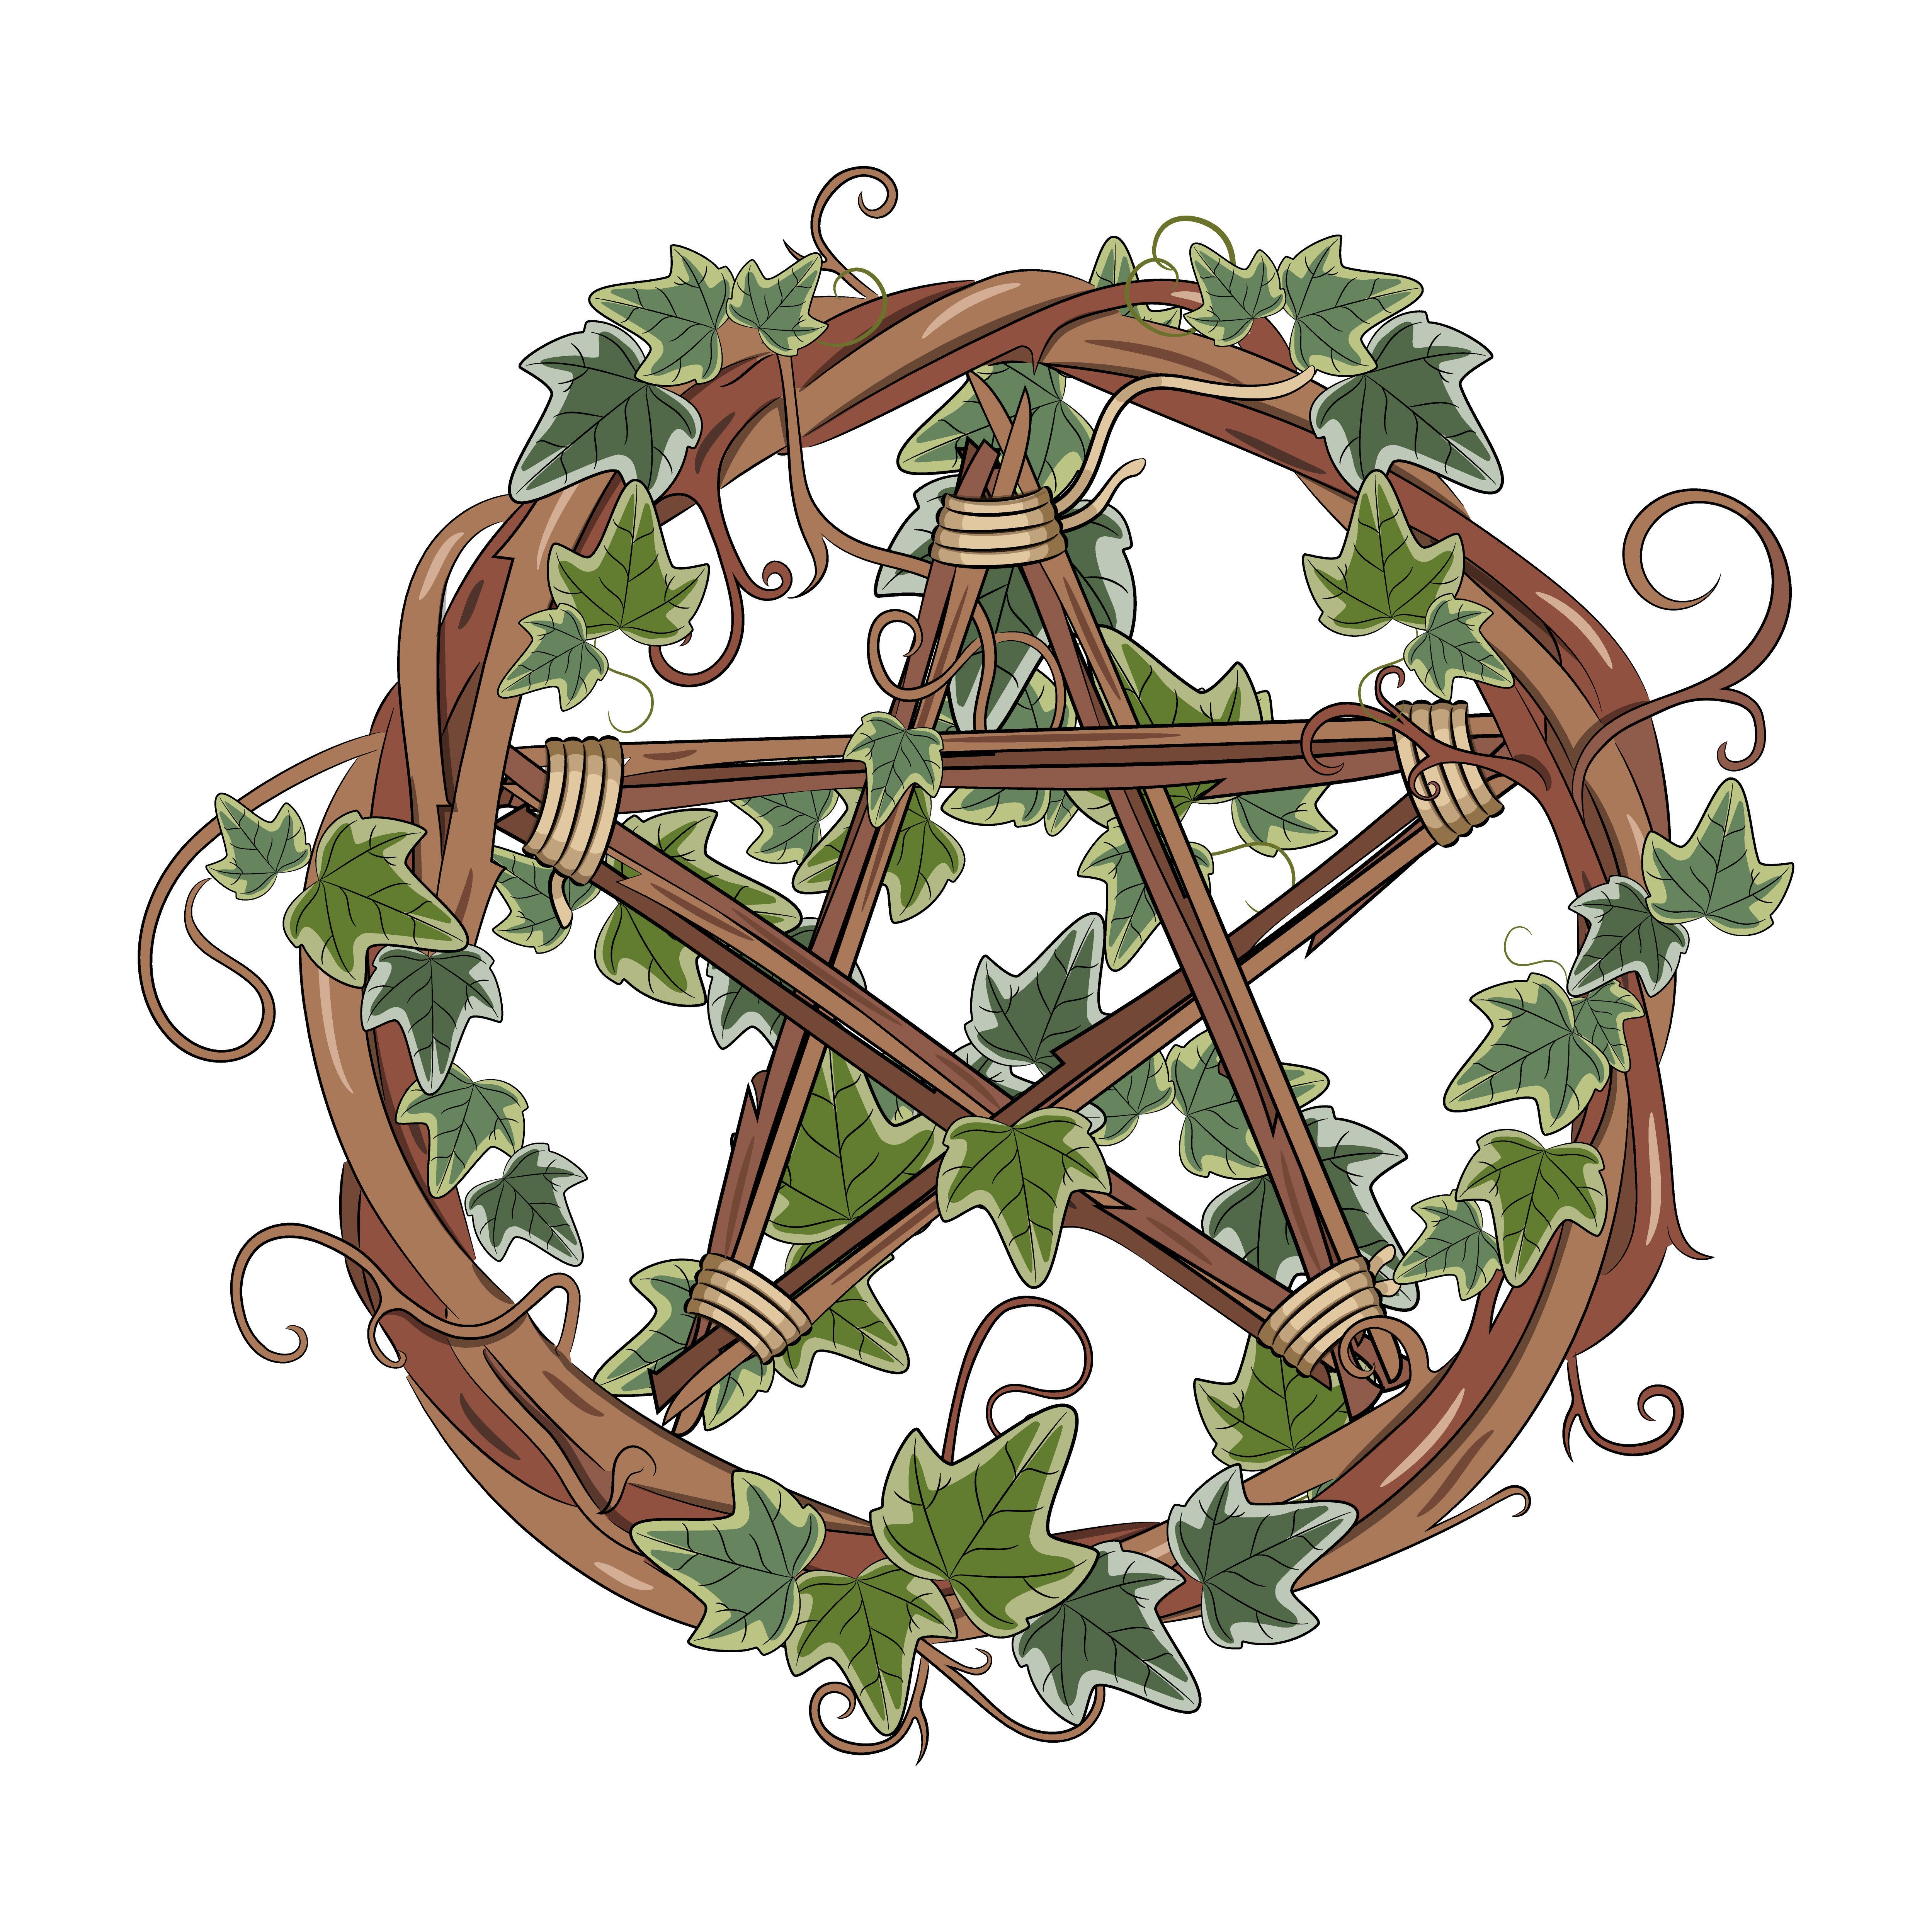 Pentacle Symbol, Its Meaning, History and Origins